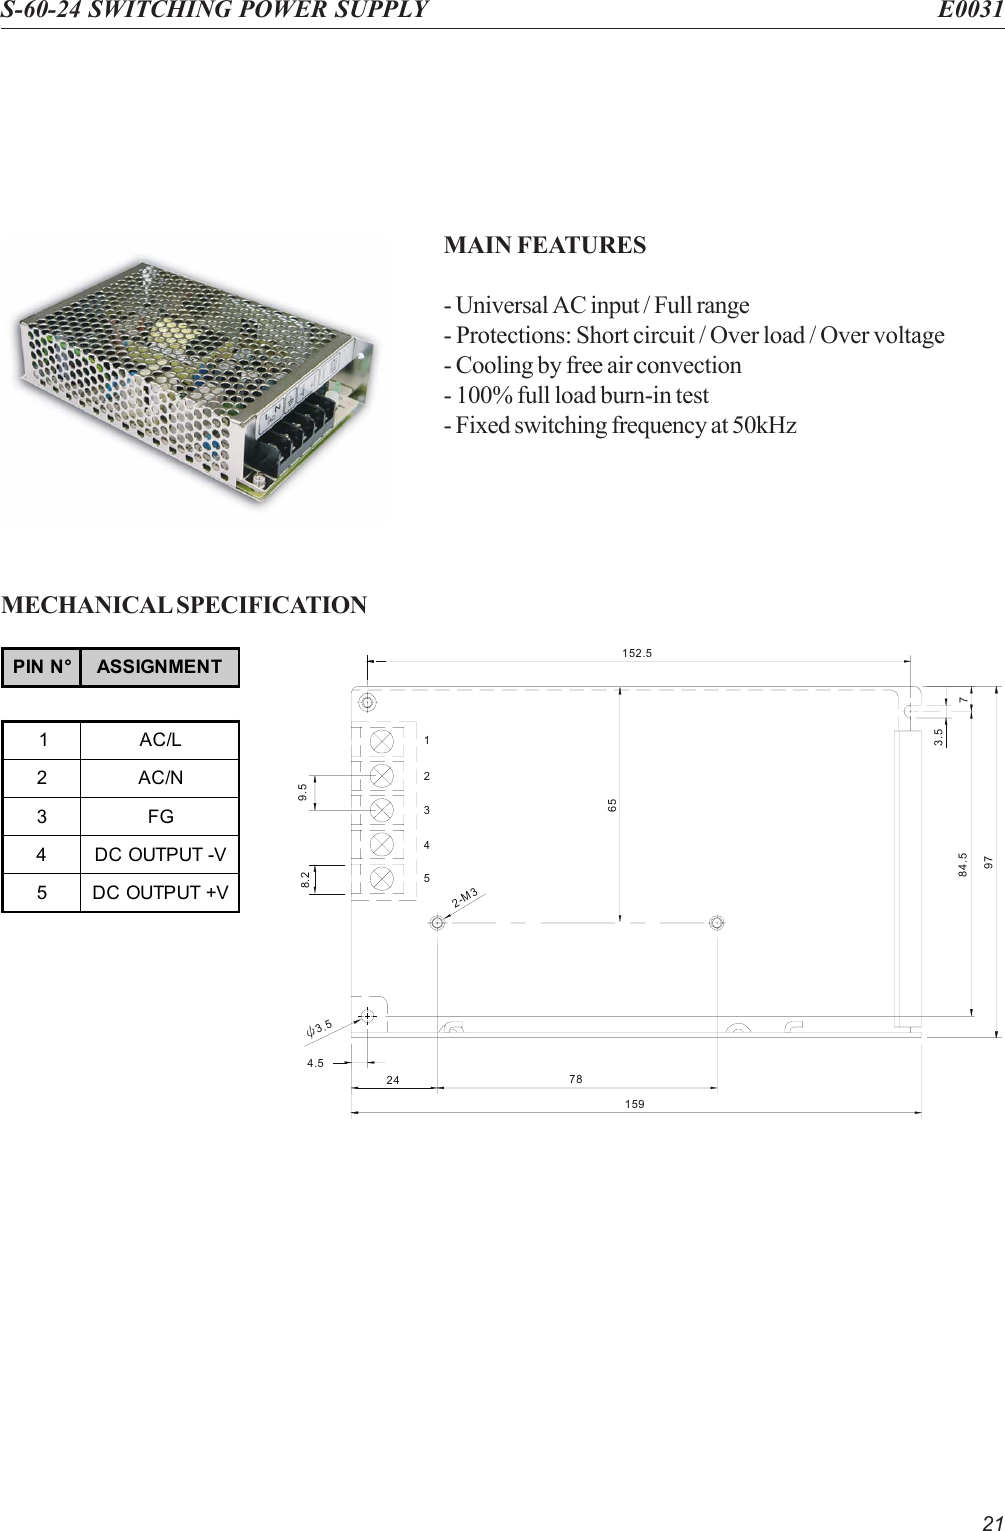 21S-60-24 SWITCHING POWER SUPPLY E0031MAIN FEATURES- Universal AC input / Full range- Protections: Short circuit / Over load / Over voltage- Cooling by free air convection- 100% full load burn-in test- Fixed switching frequency at 50kHzMECHANICAL SPECIFICATION4.565152.59784.5 72-M378241593.53.554328.2 9.51PIN N° ASSIGNMENT1AC/L2AC/N3FG4DC OUTPUT -V5DC OUTPUT +V